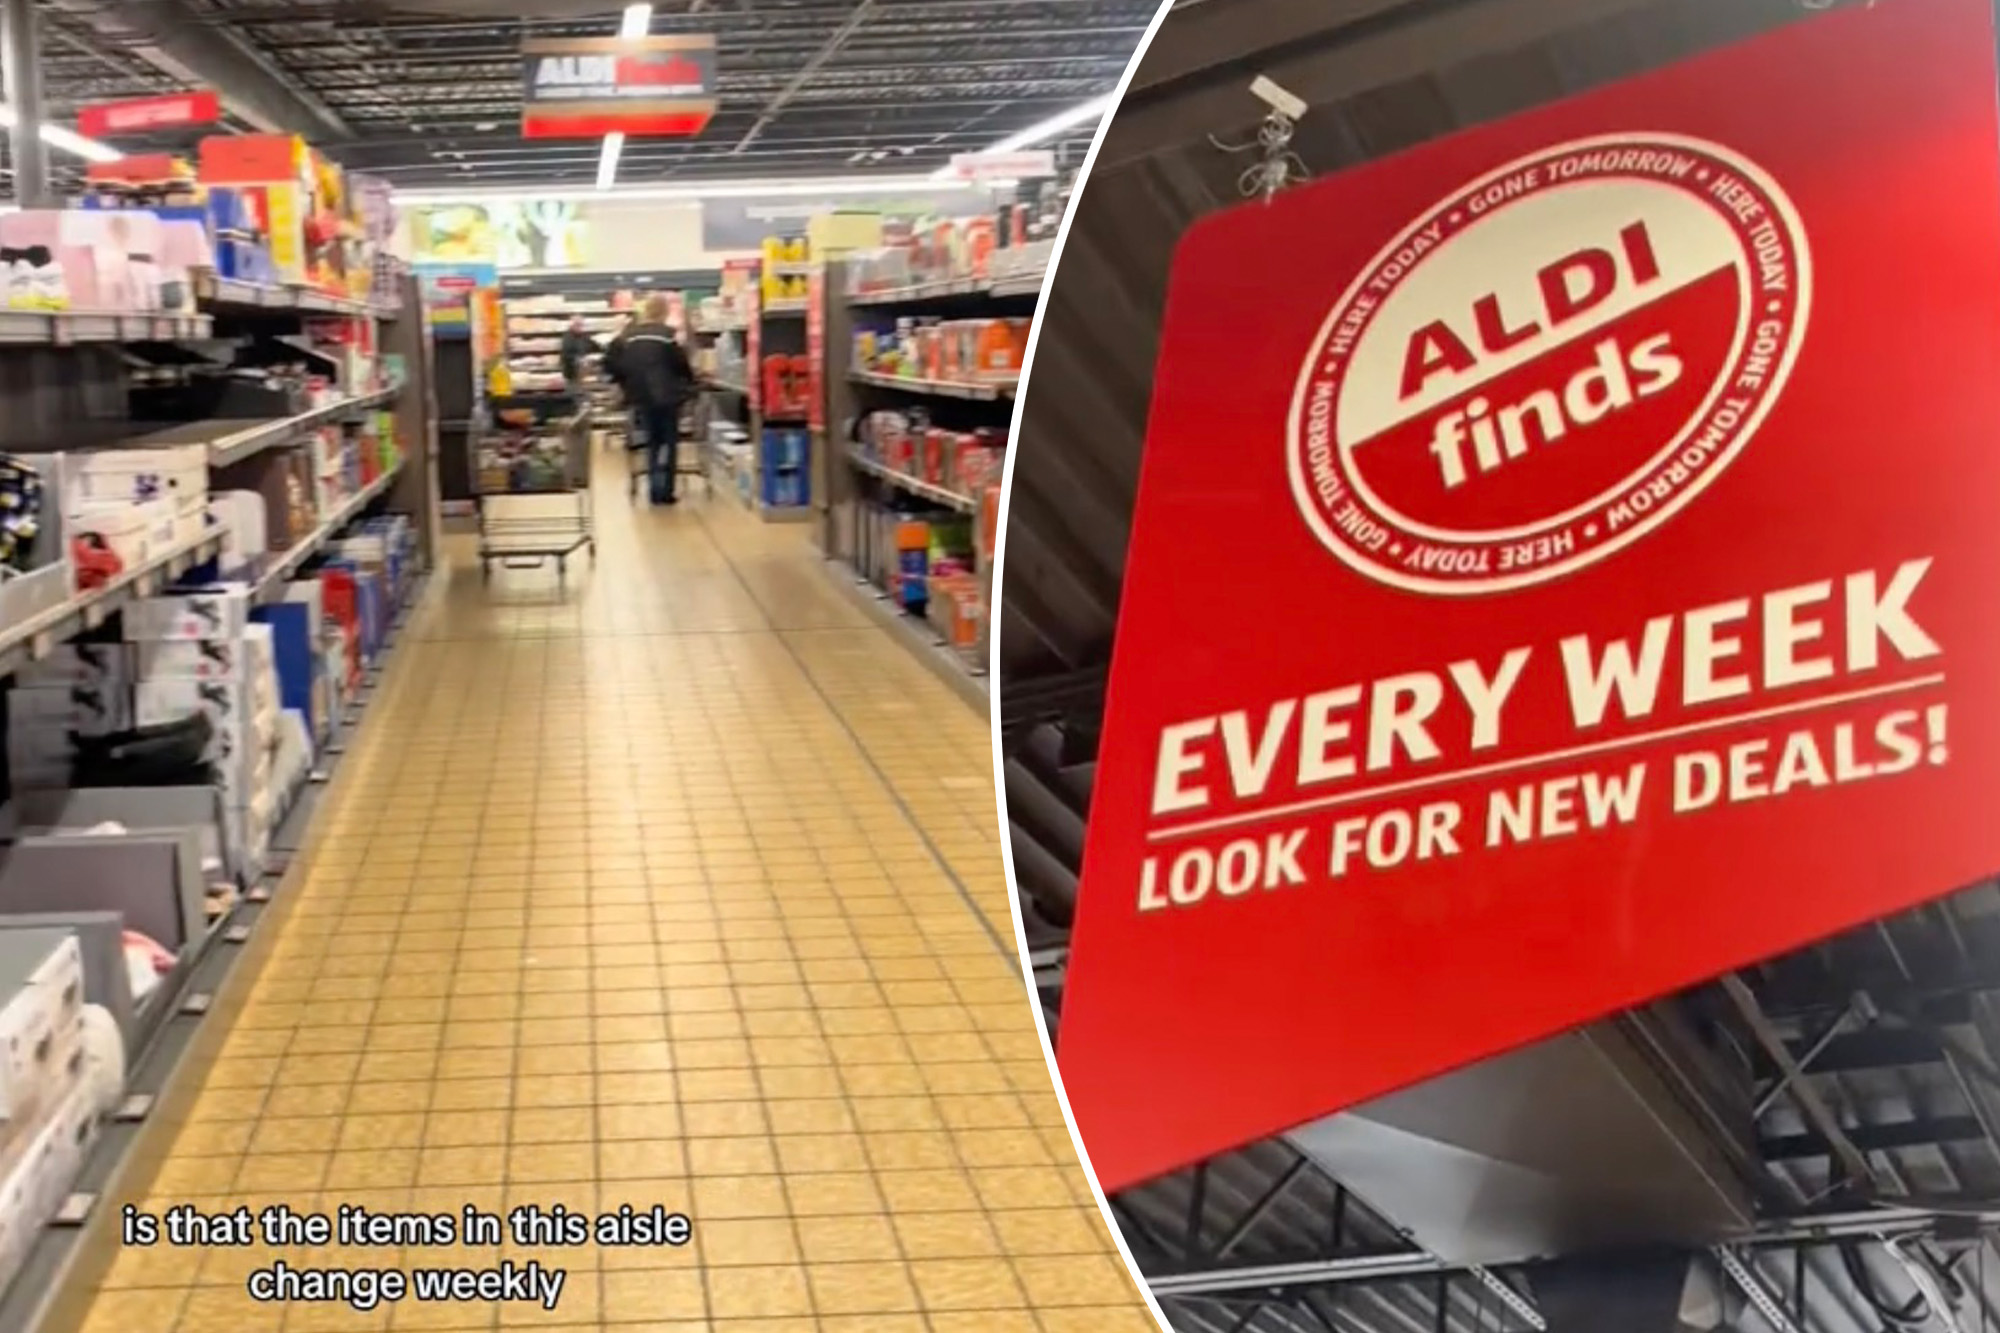 The middle aisle of Aldi, a German discount supermarket chain, has become known as the "aisle of shame" for its low-priced, limited-time novelties.